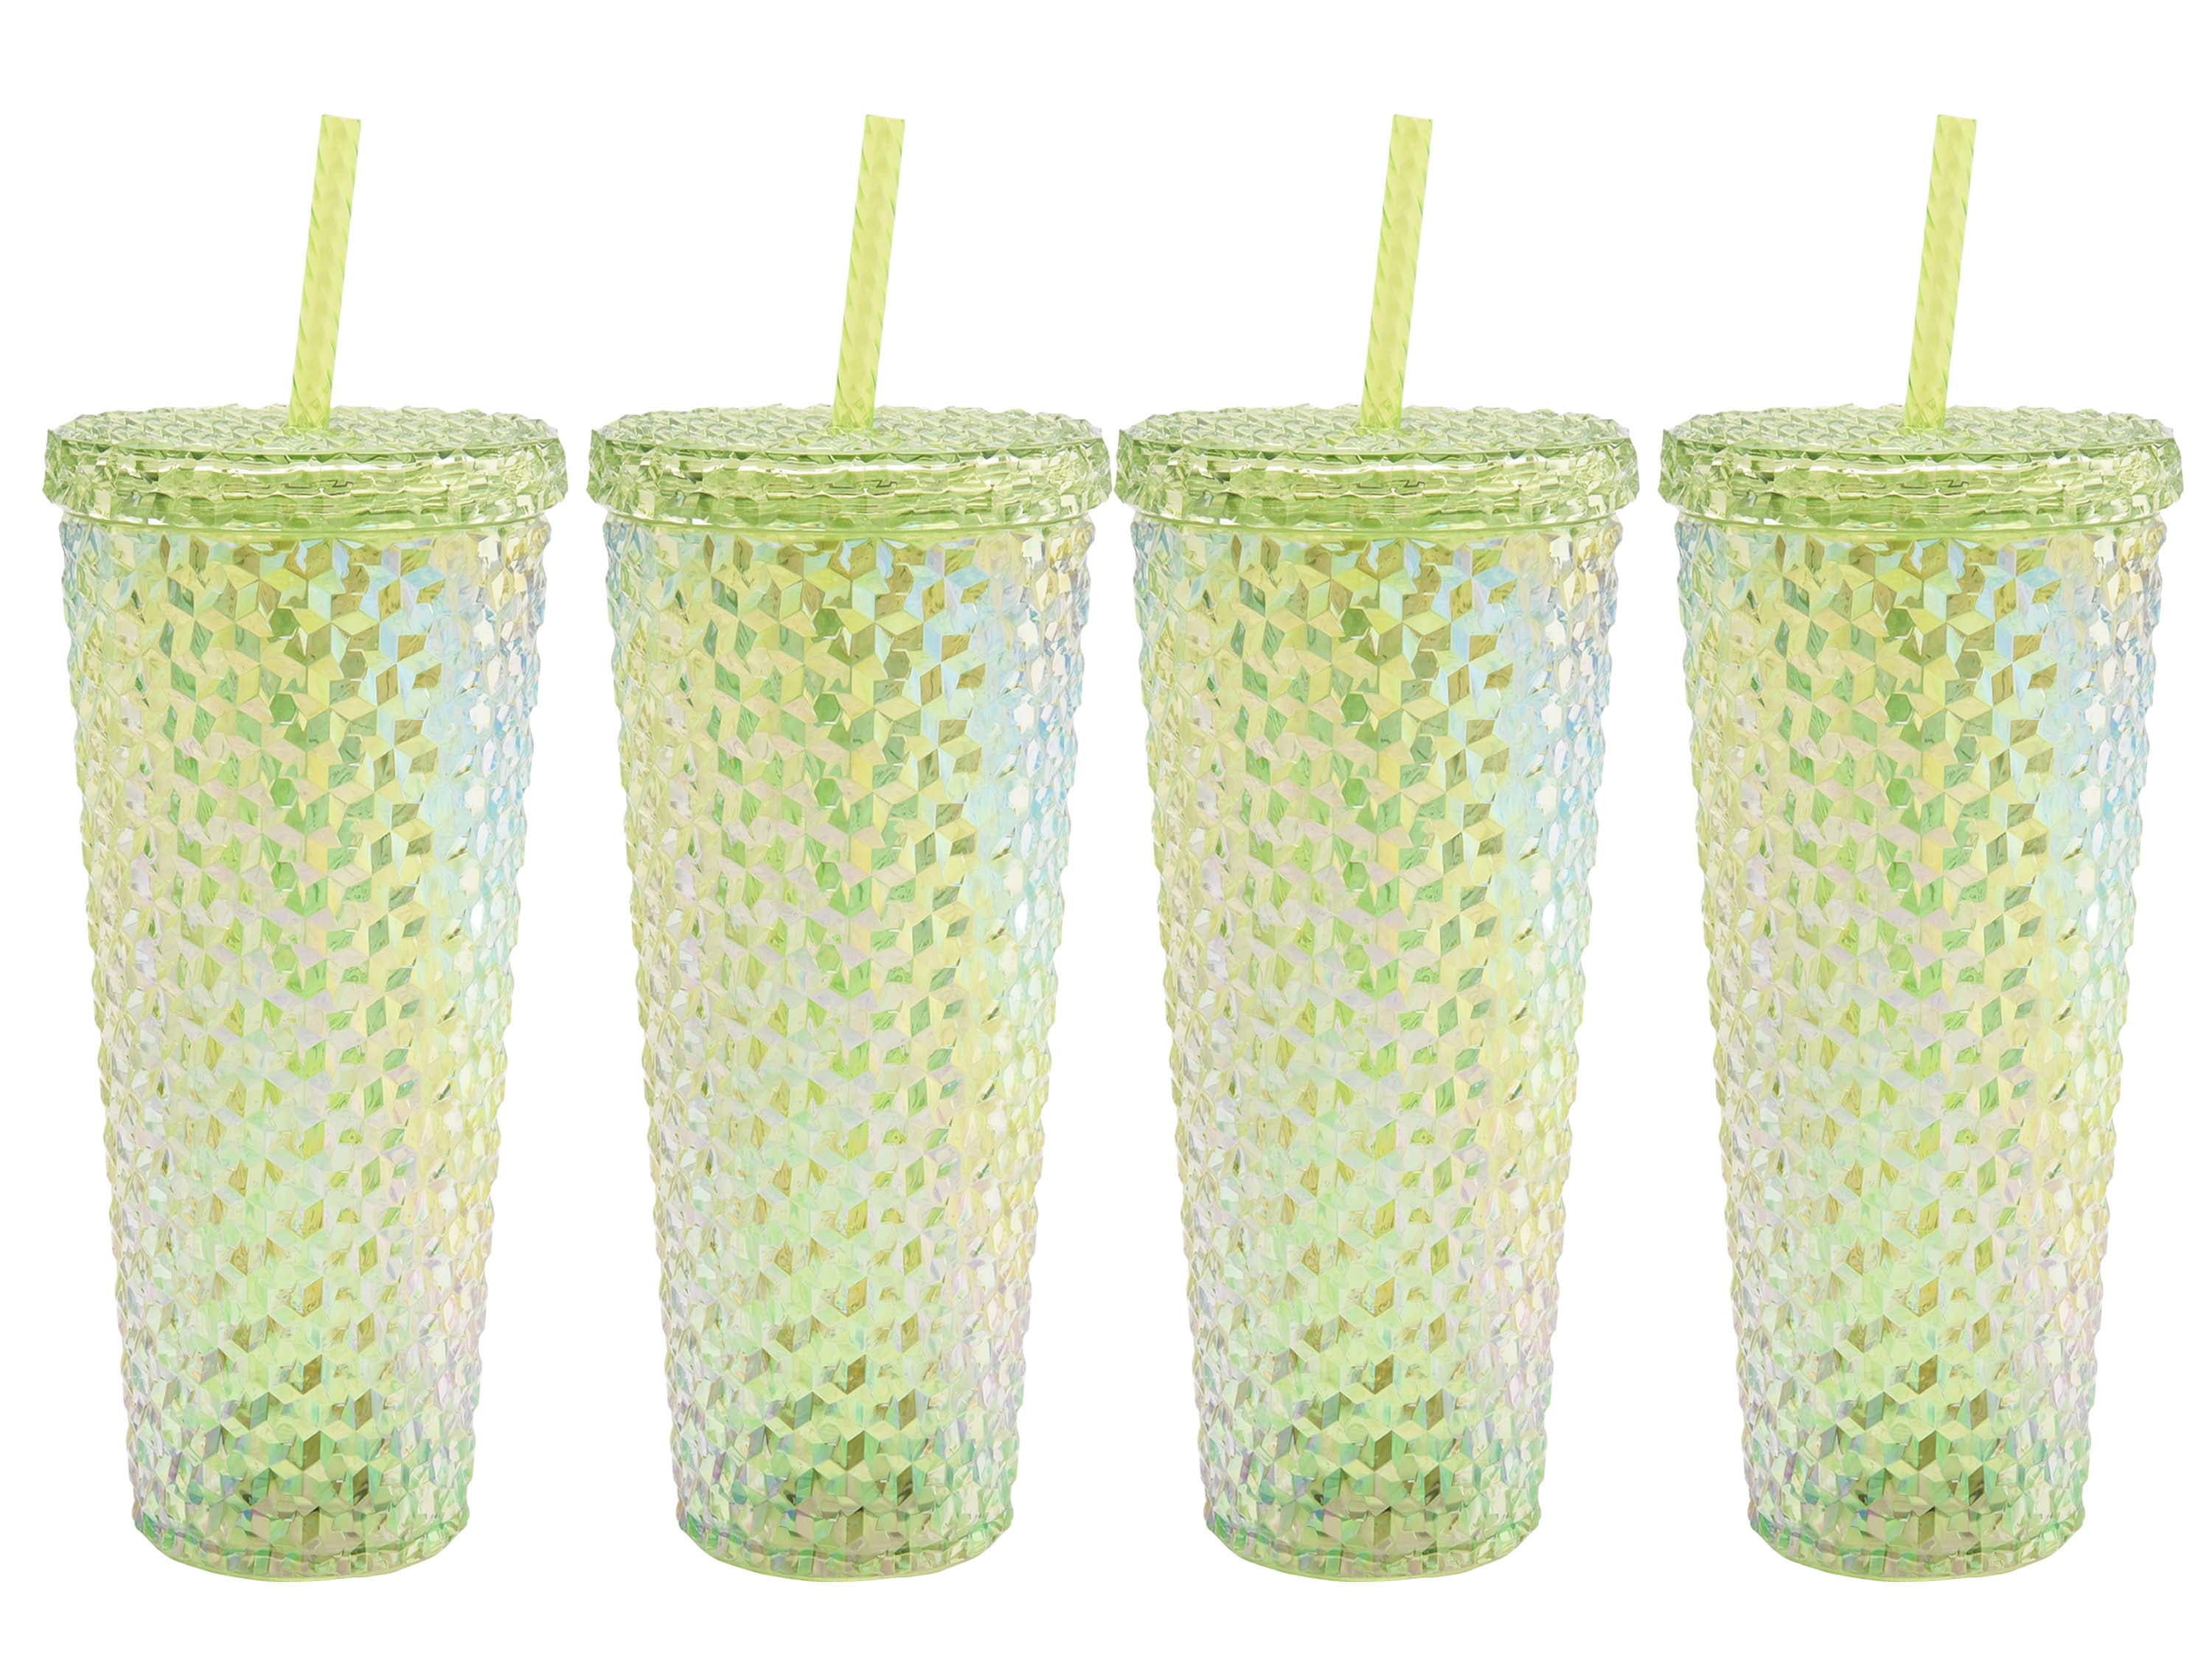 12 Green Plastic Drinking Glasses Lids and Straws Mfg USA Green 12 Ounces 